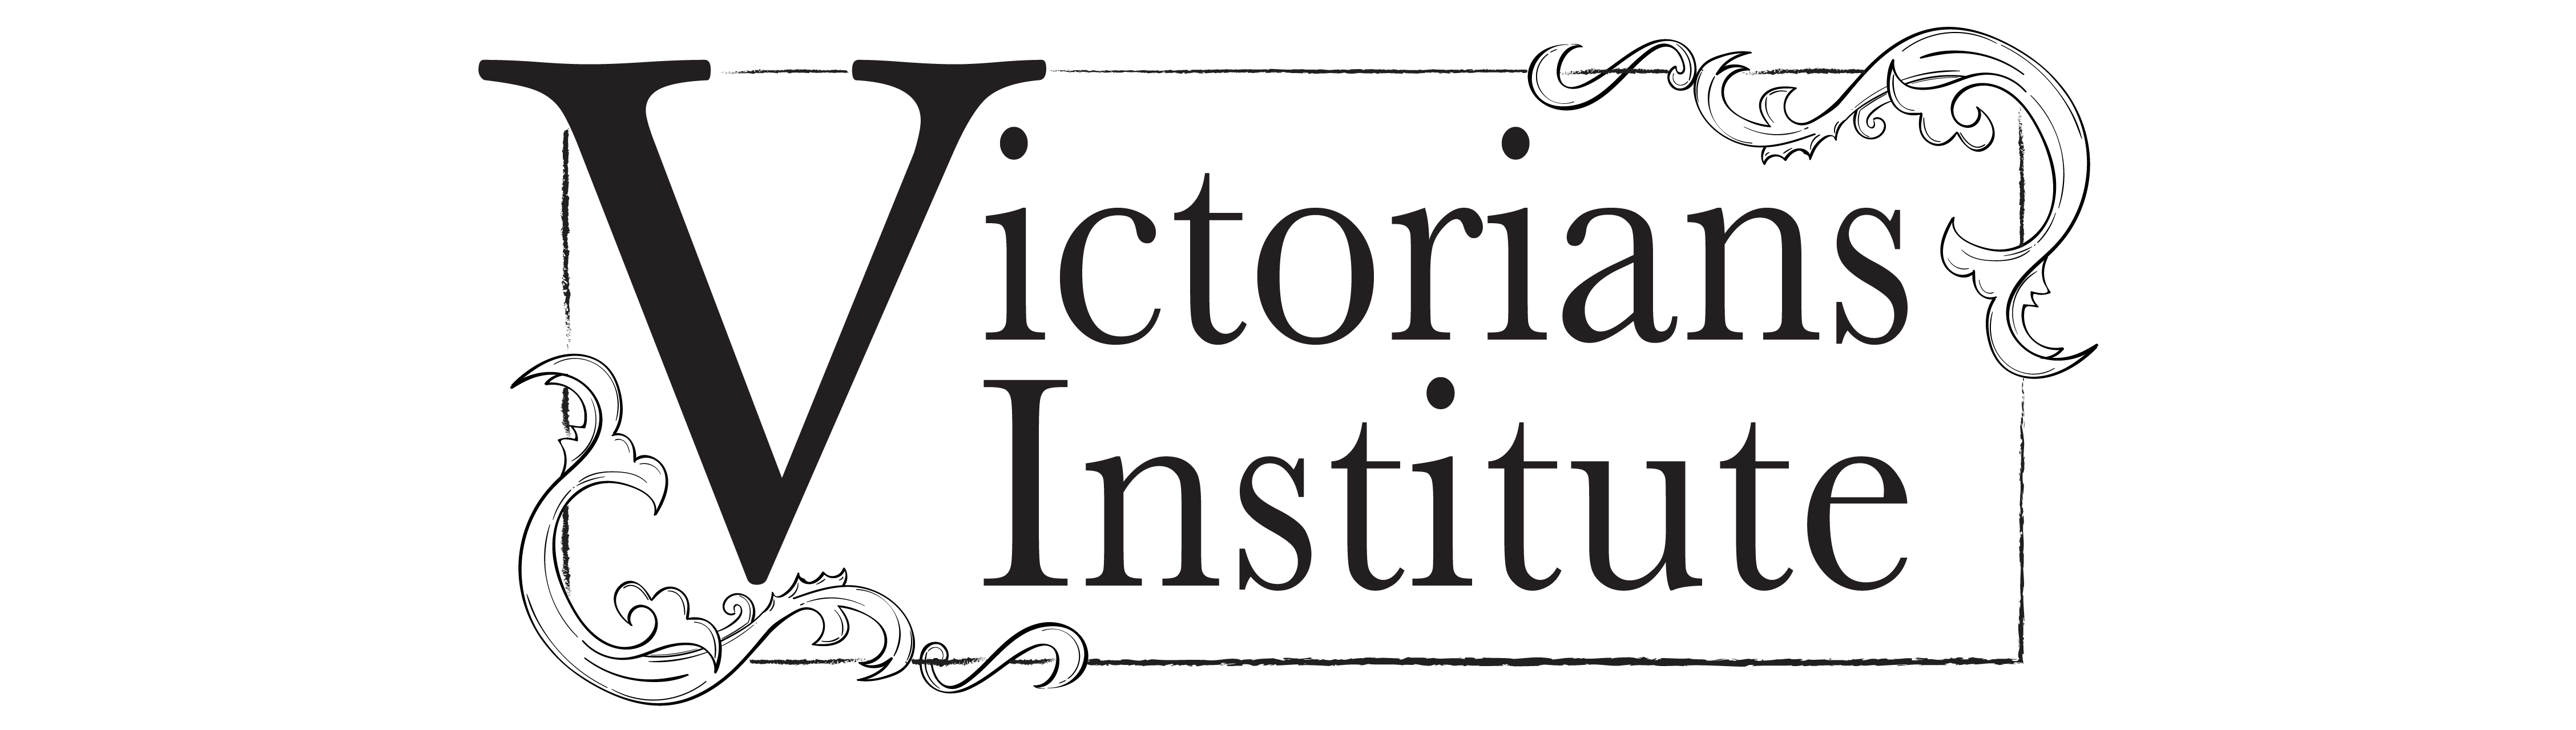 Victorians Institute and Journal